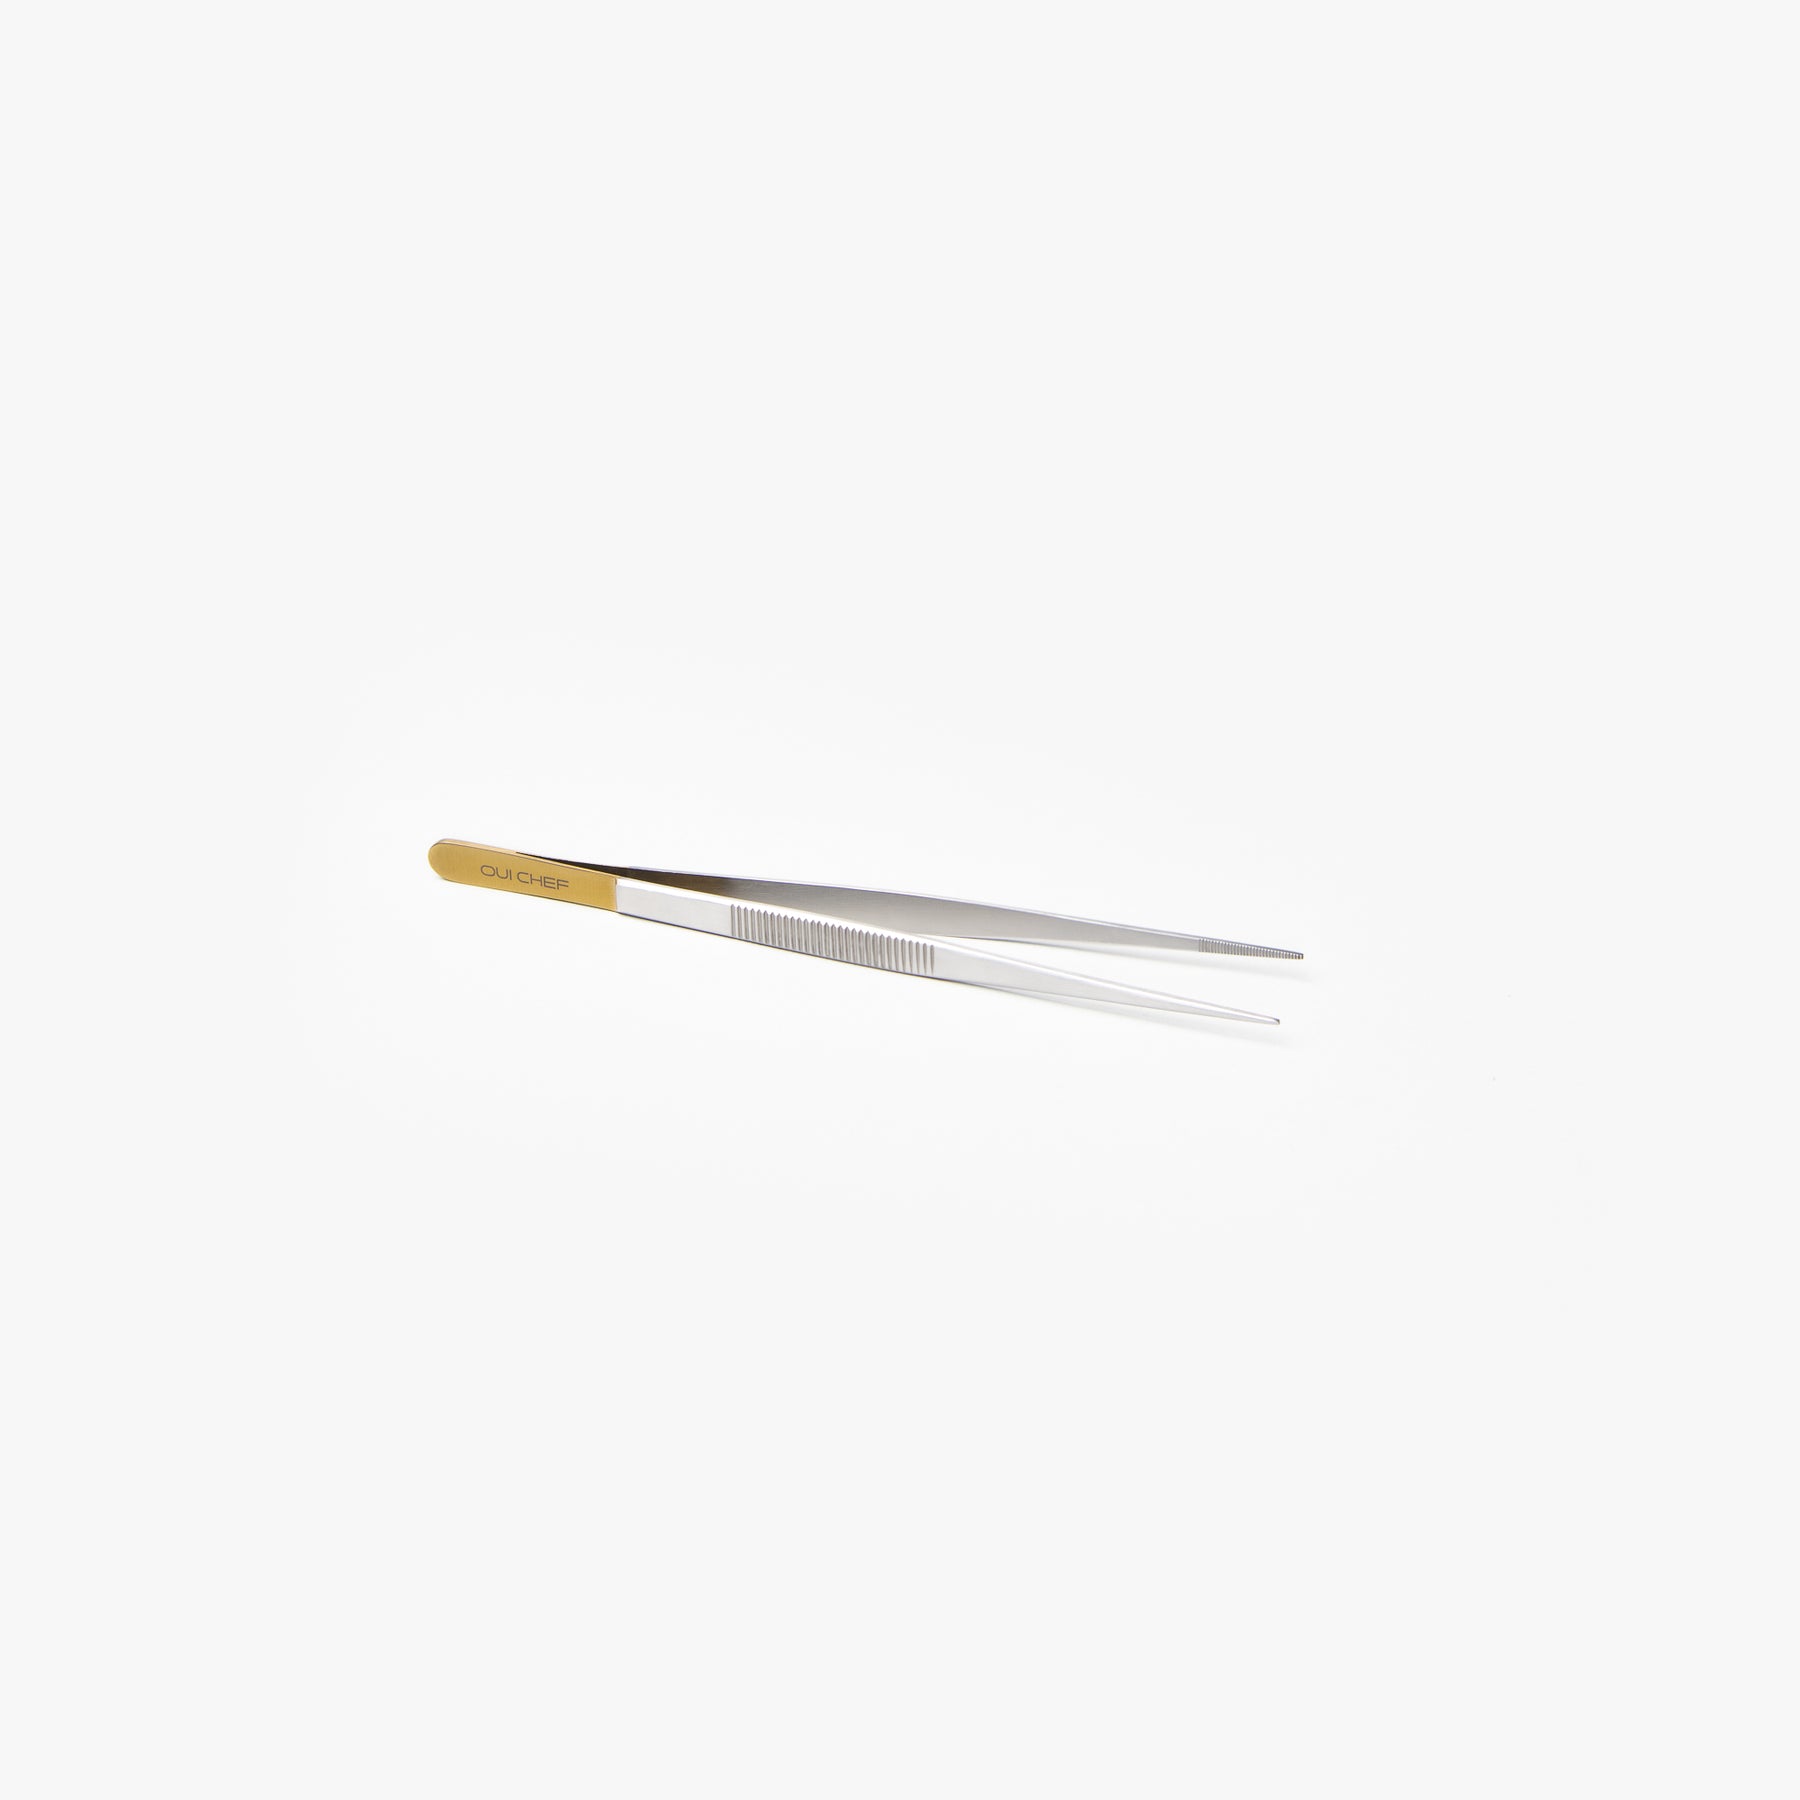 Small Straight SuperFine Tweezers & Holdfast Magnetic Pin Bundle